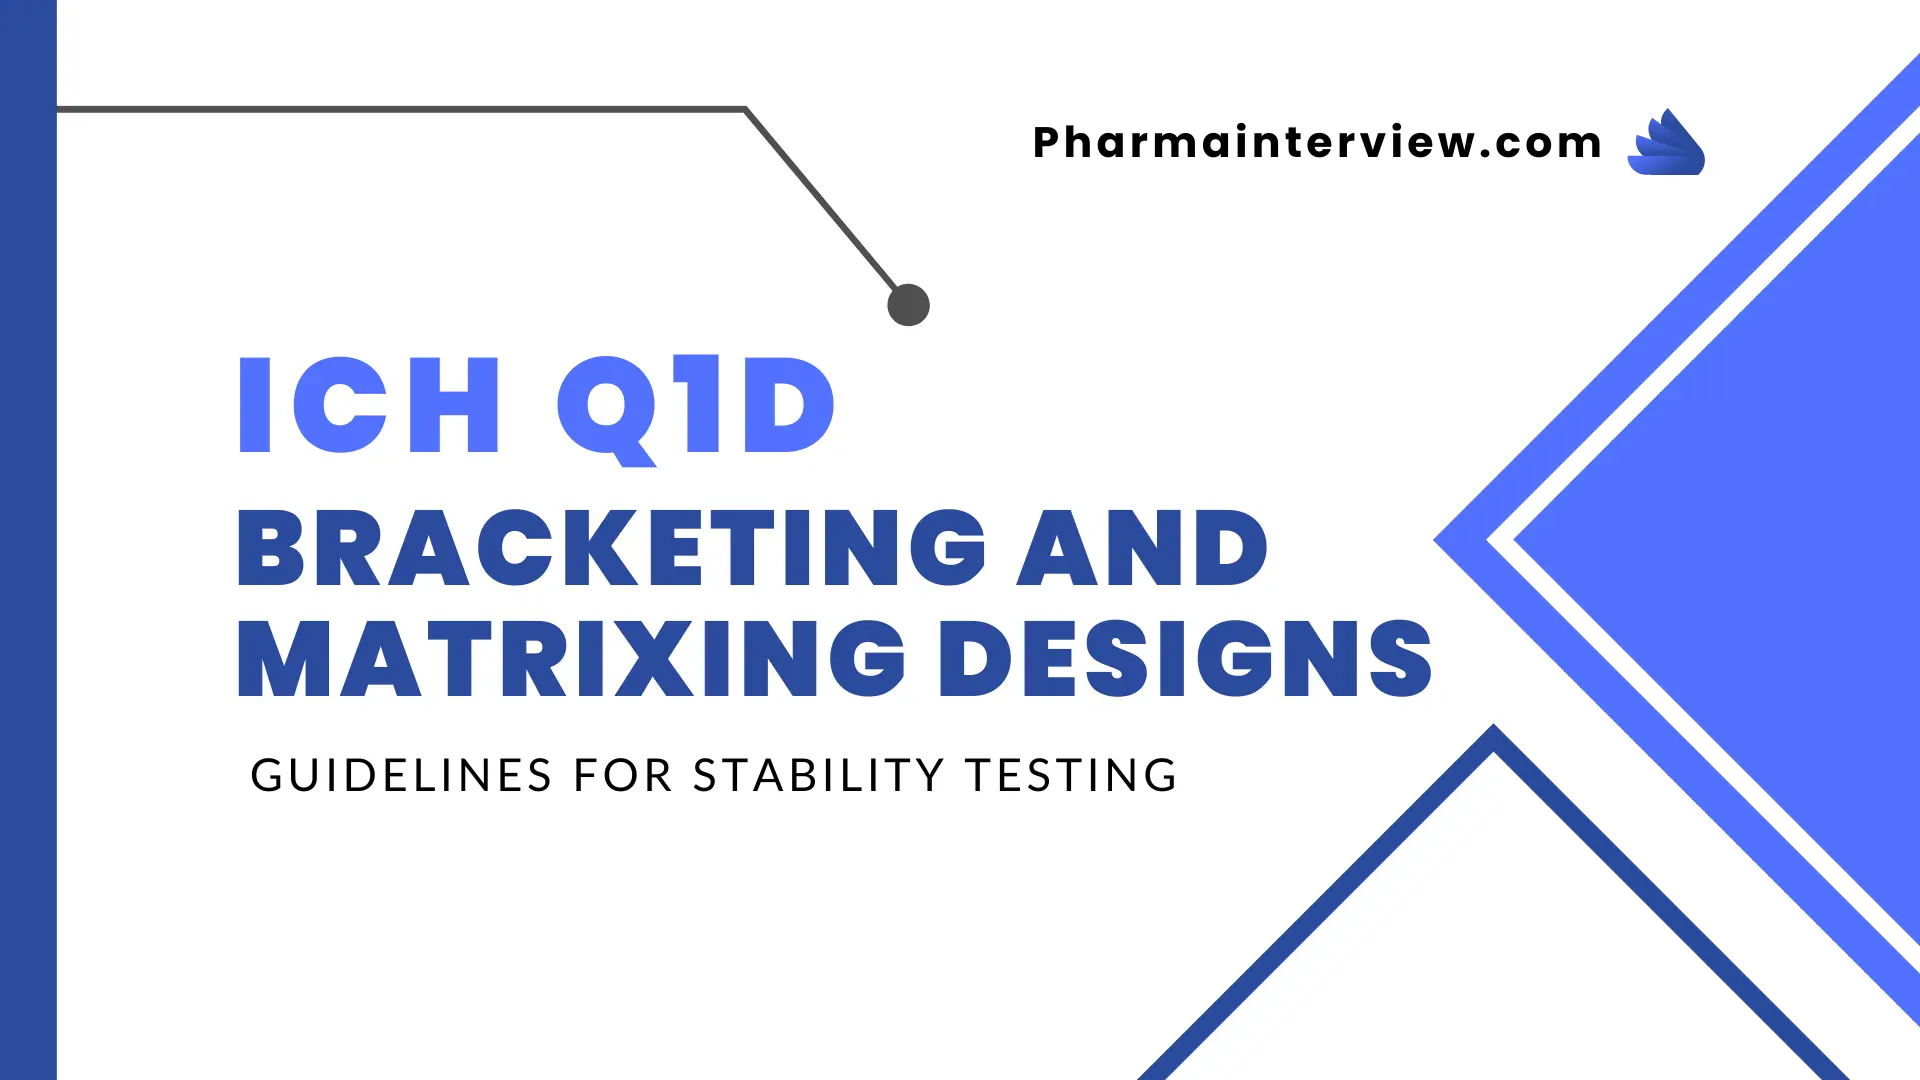 ICH Q1D Guidelines for stability testing of pharmaceutical products